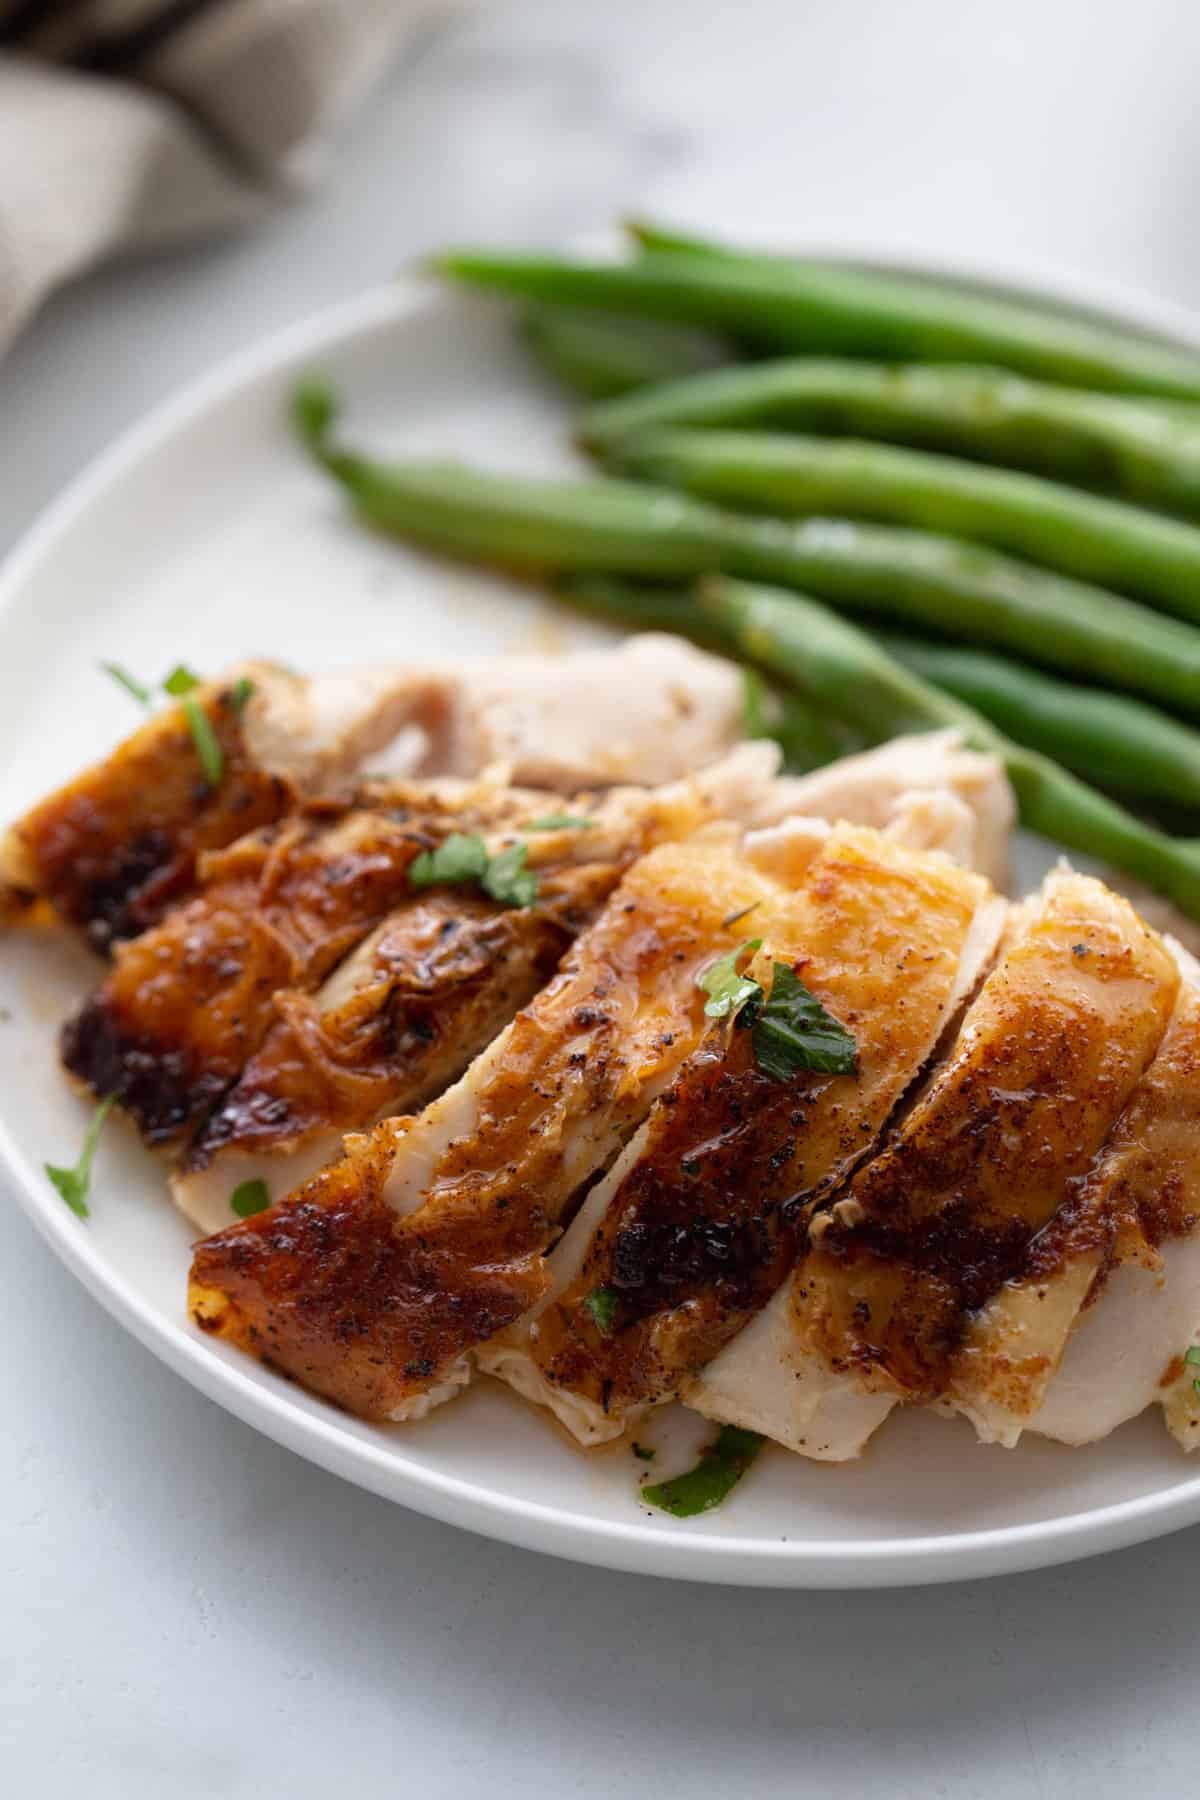 Sliced chicken breast with green beans.